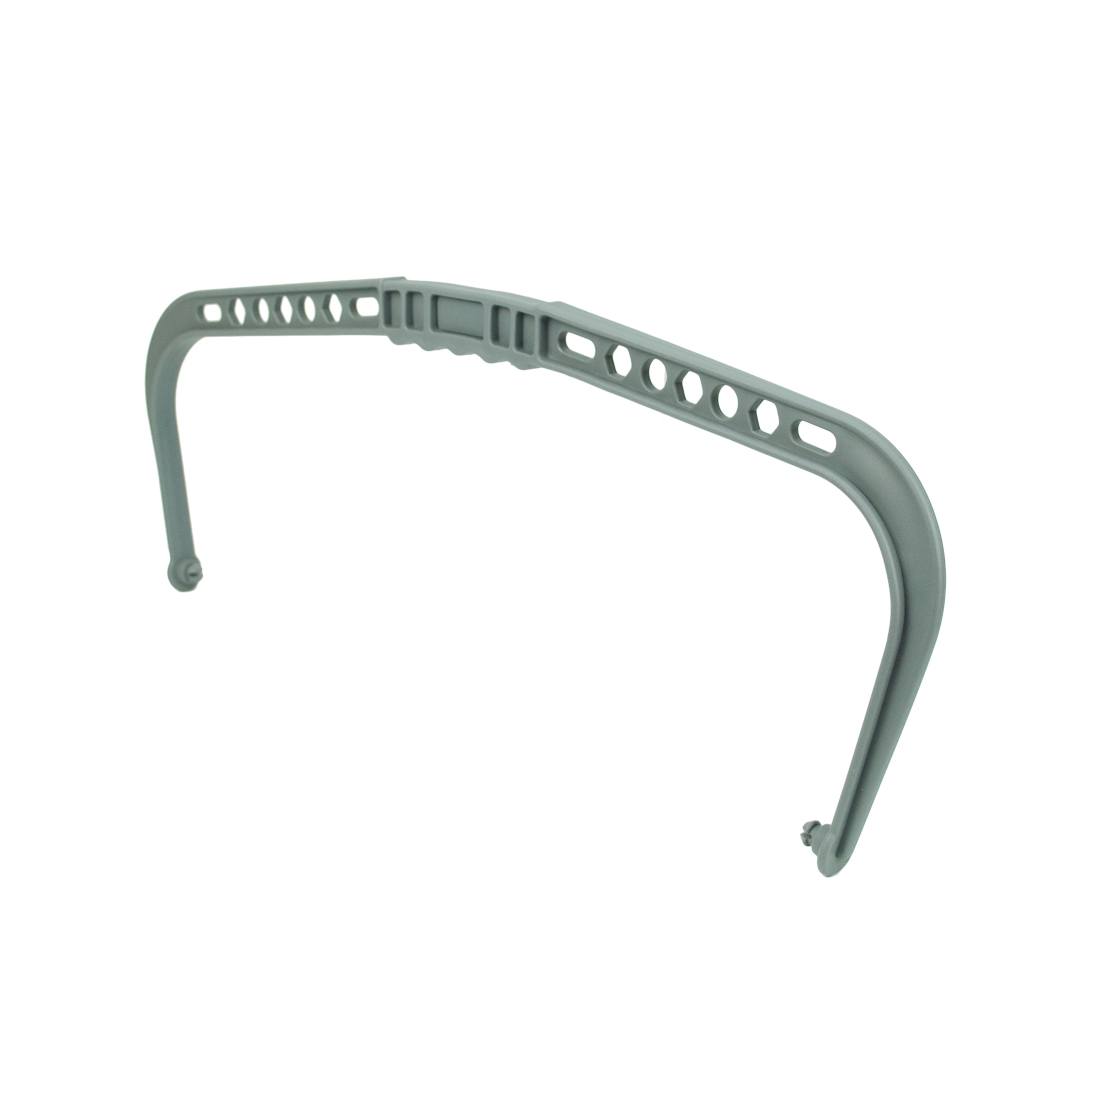 Ettore Super Bucket Handle - Angled Right Side View